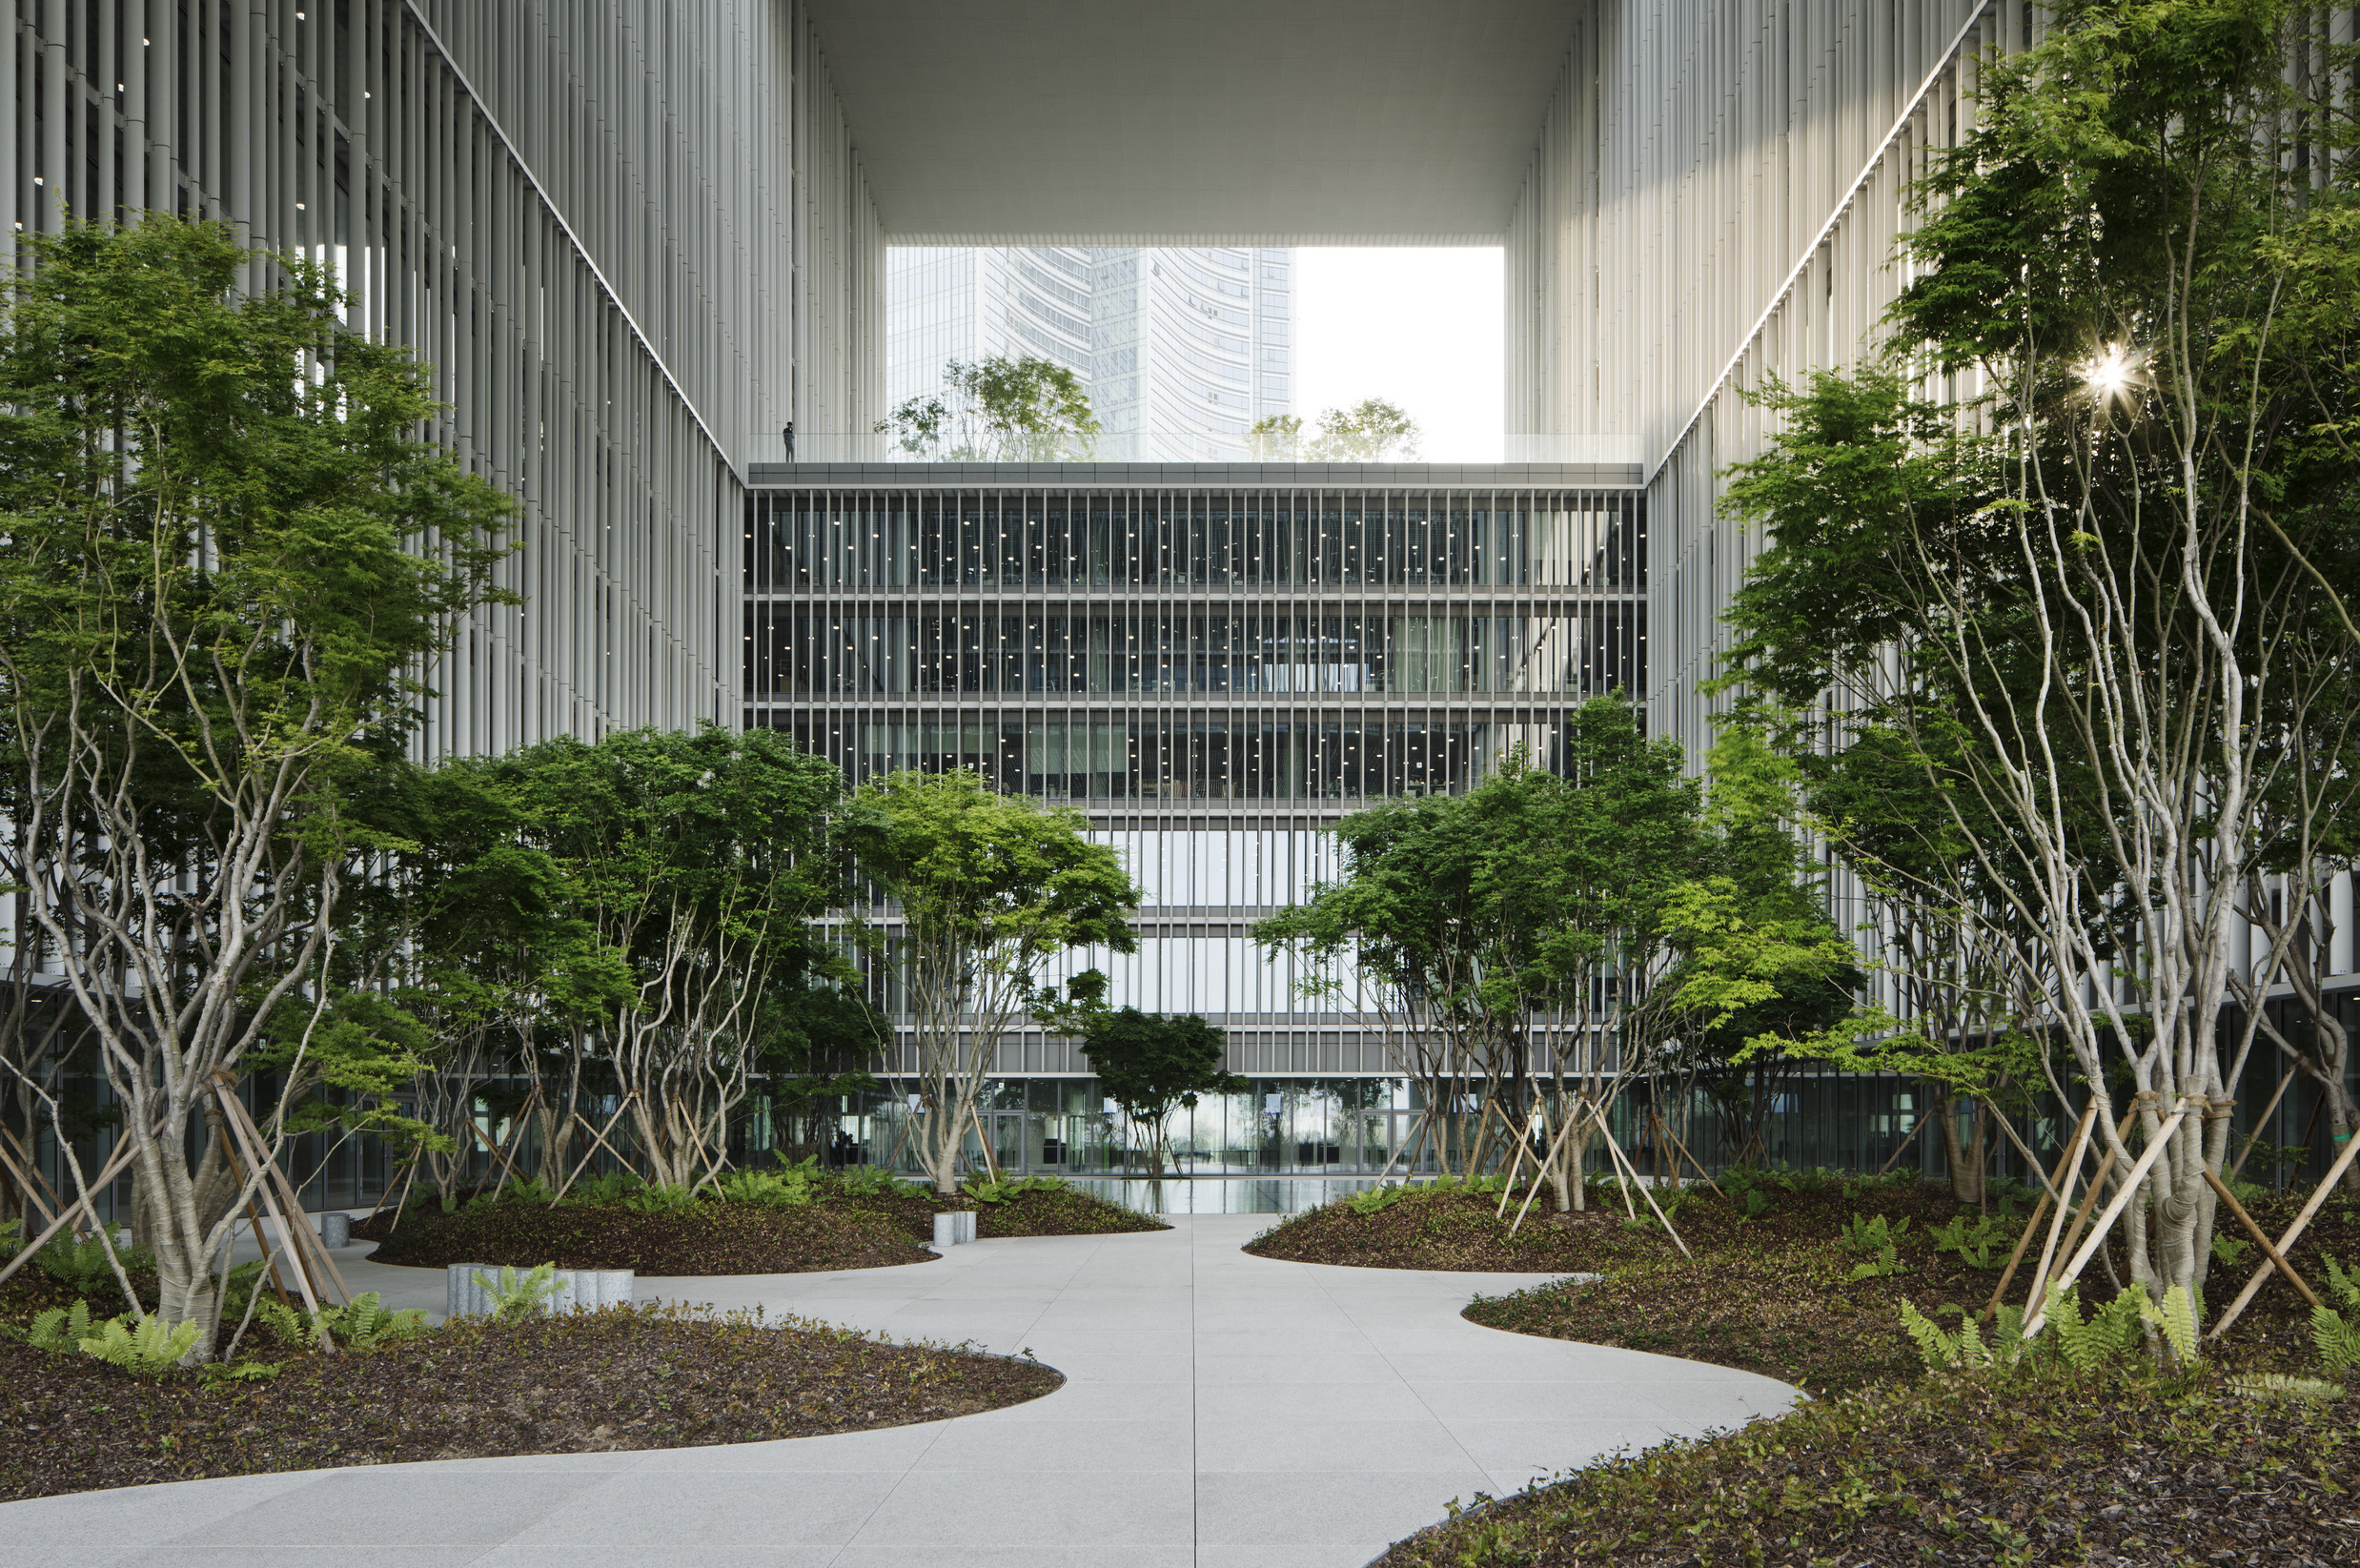 Amorepacific headquarters • David Chipperfield Architects